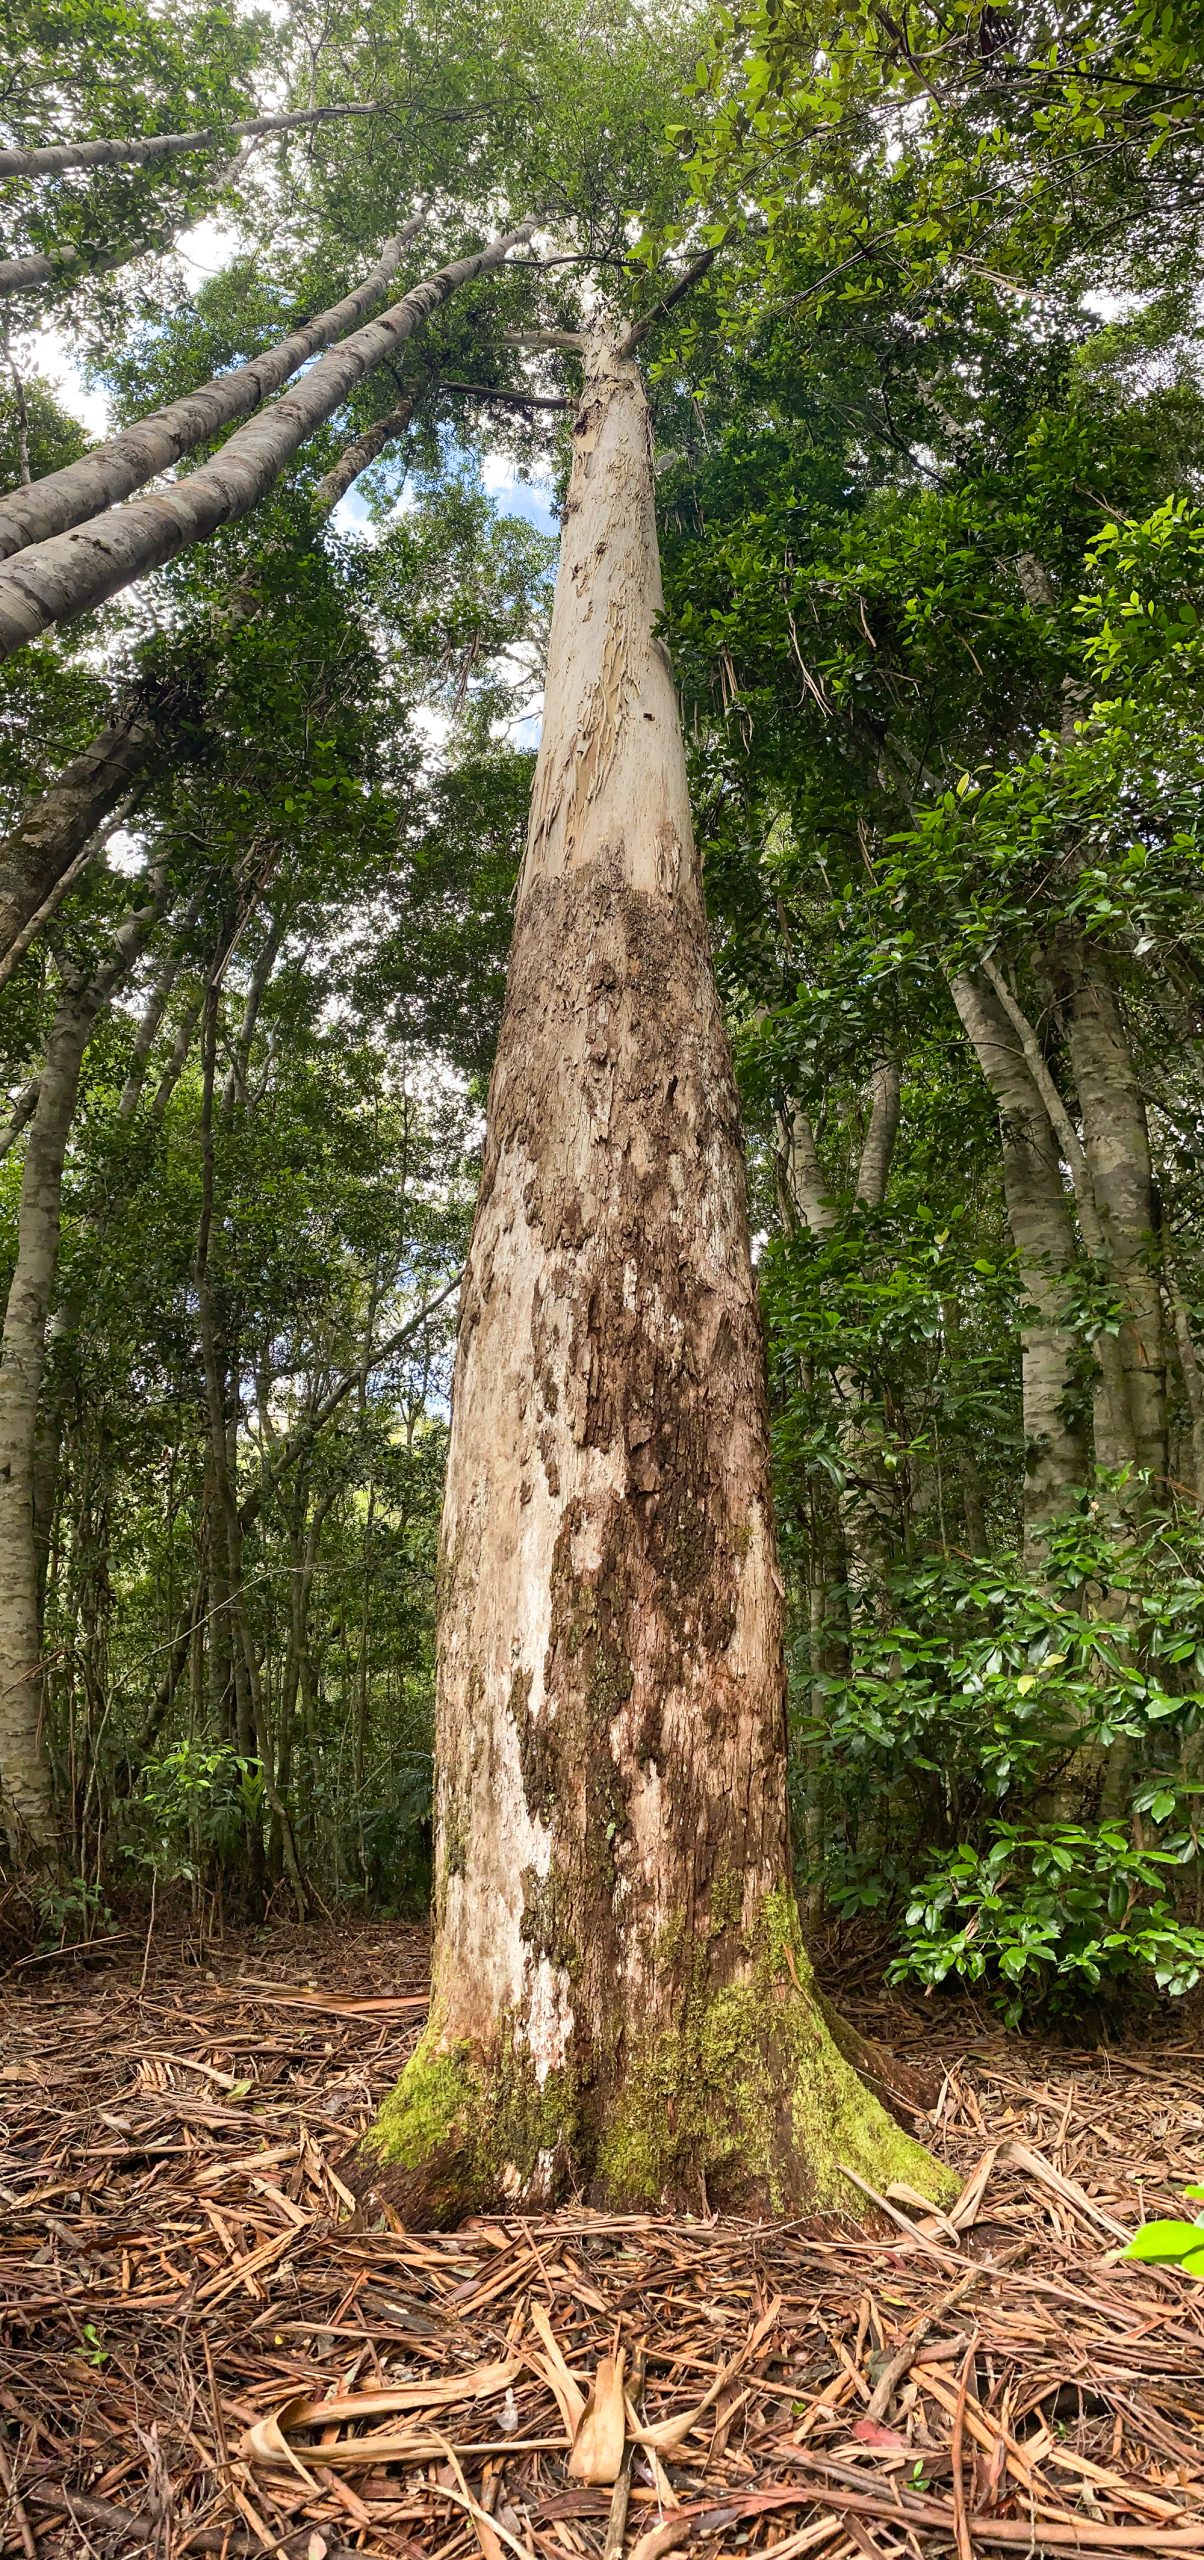 Veritical Panaroma of a Tree in a national park. Photo: Tim Ashelford